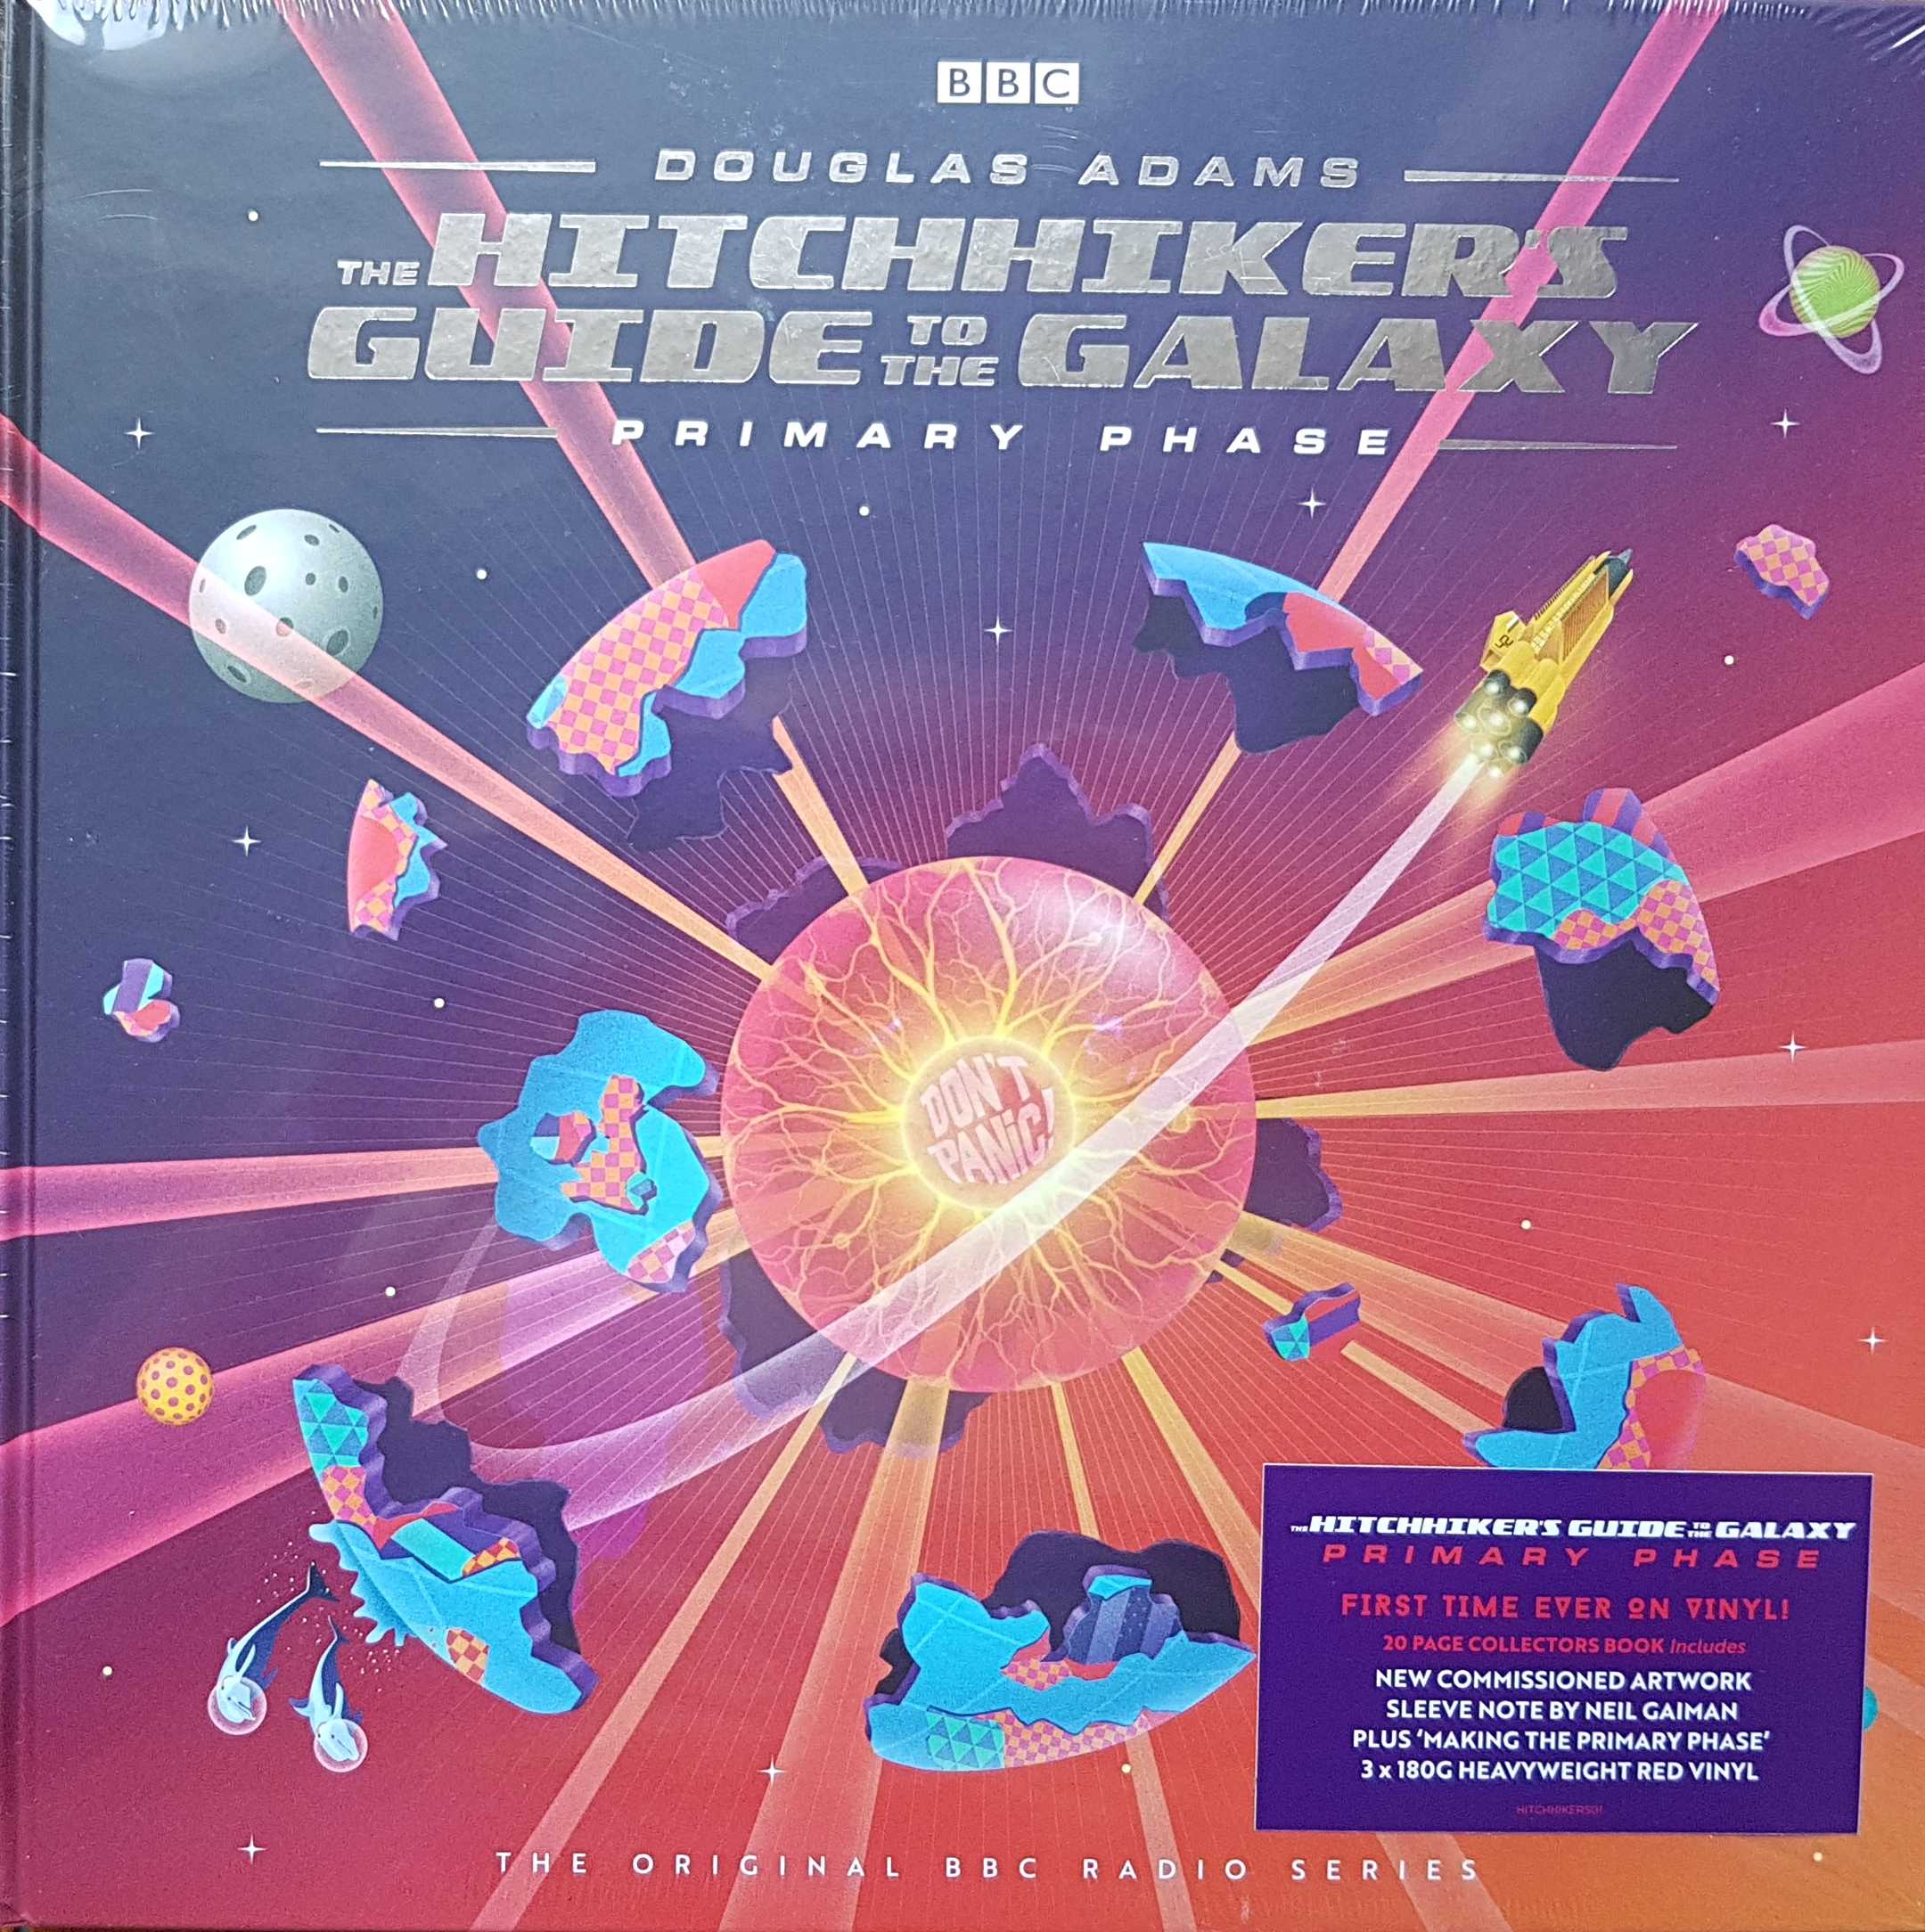 Picture of HITCHHIKERS01 The hitch-hiker's guide to the galaxy - Primary phrase (Limited edition coloured vinyl) by artist Douglas Adams from the BBC albums - Records and Tapes library